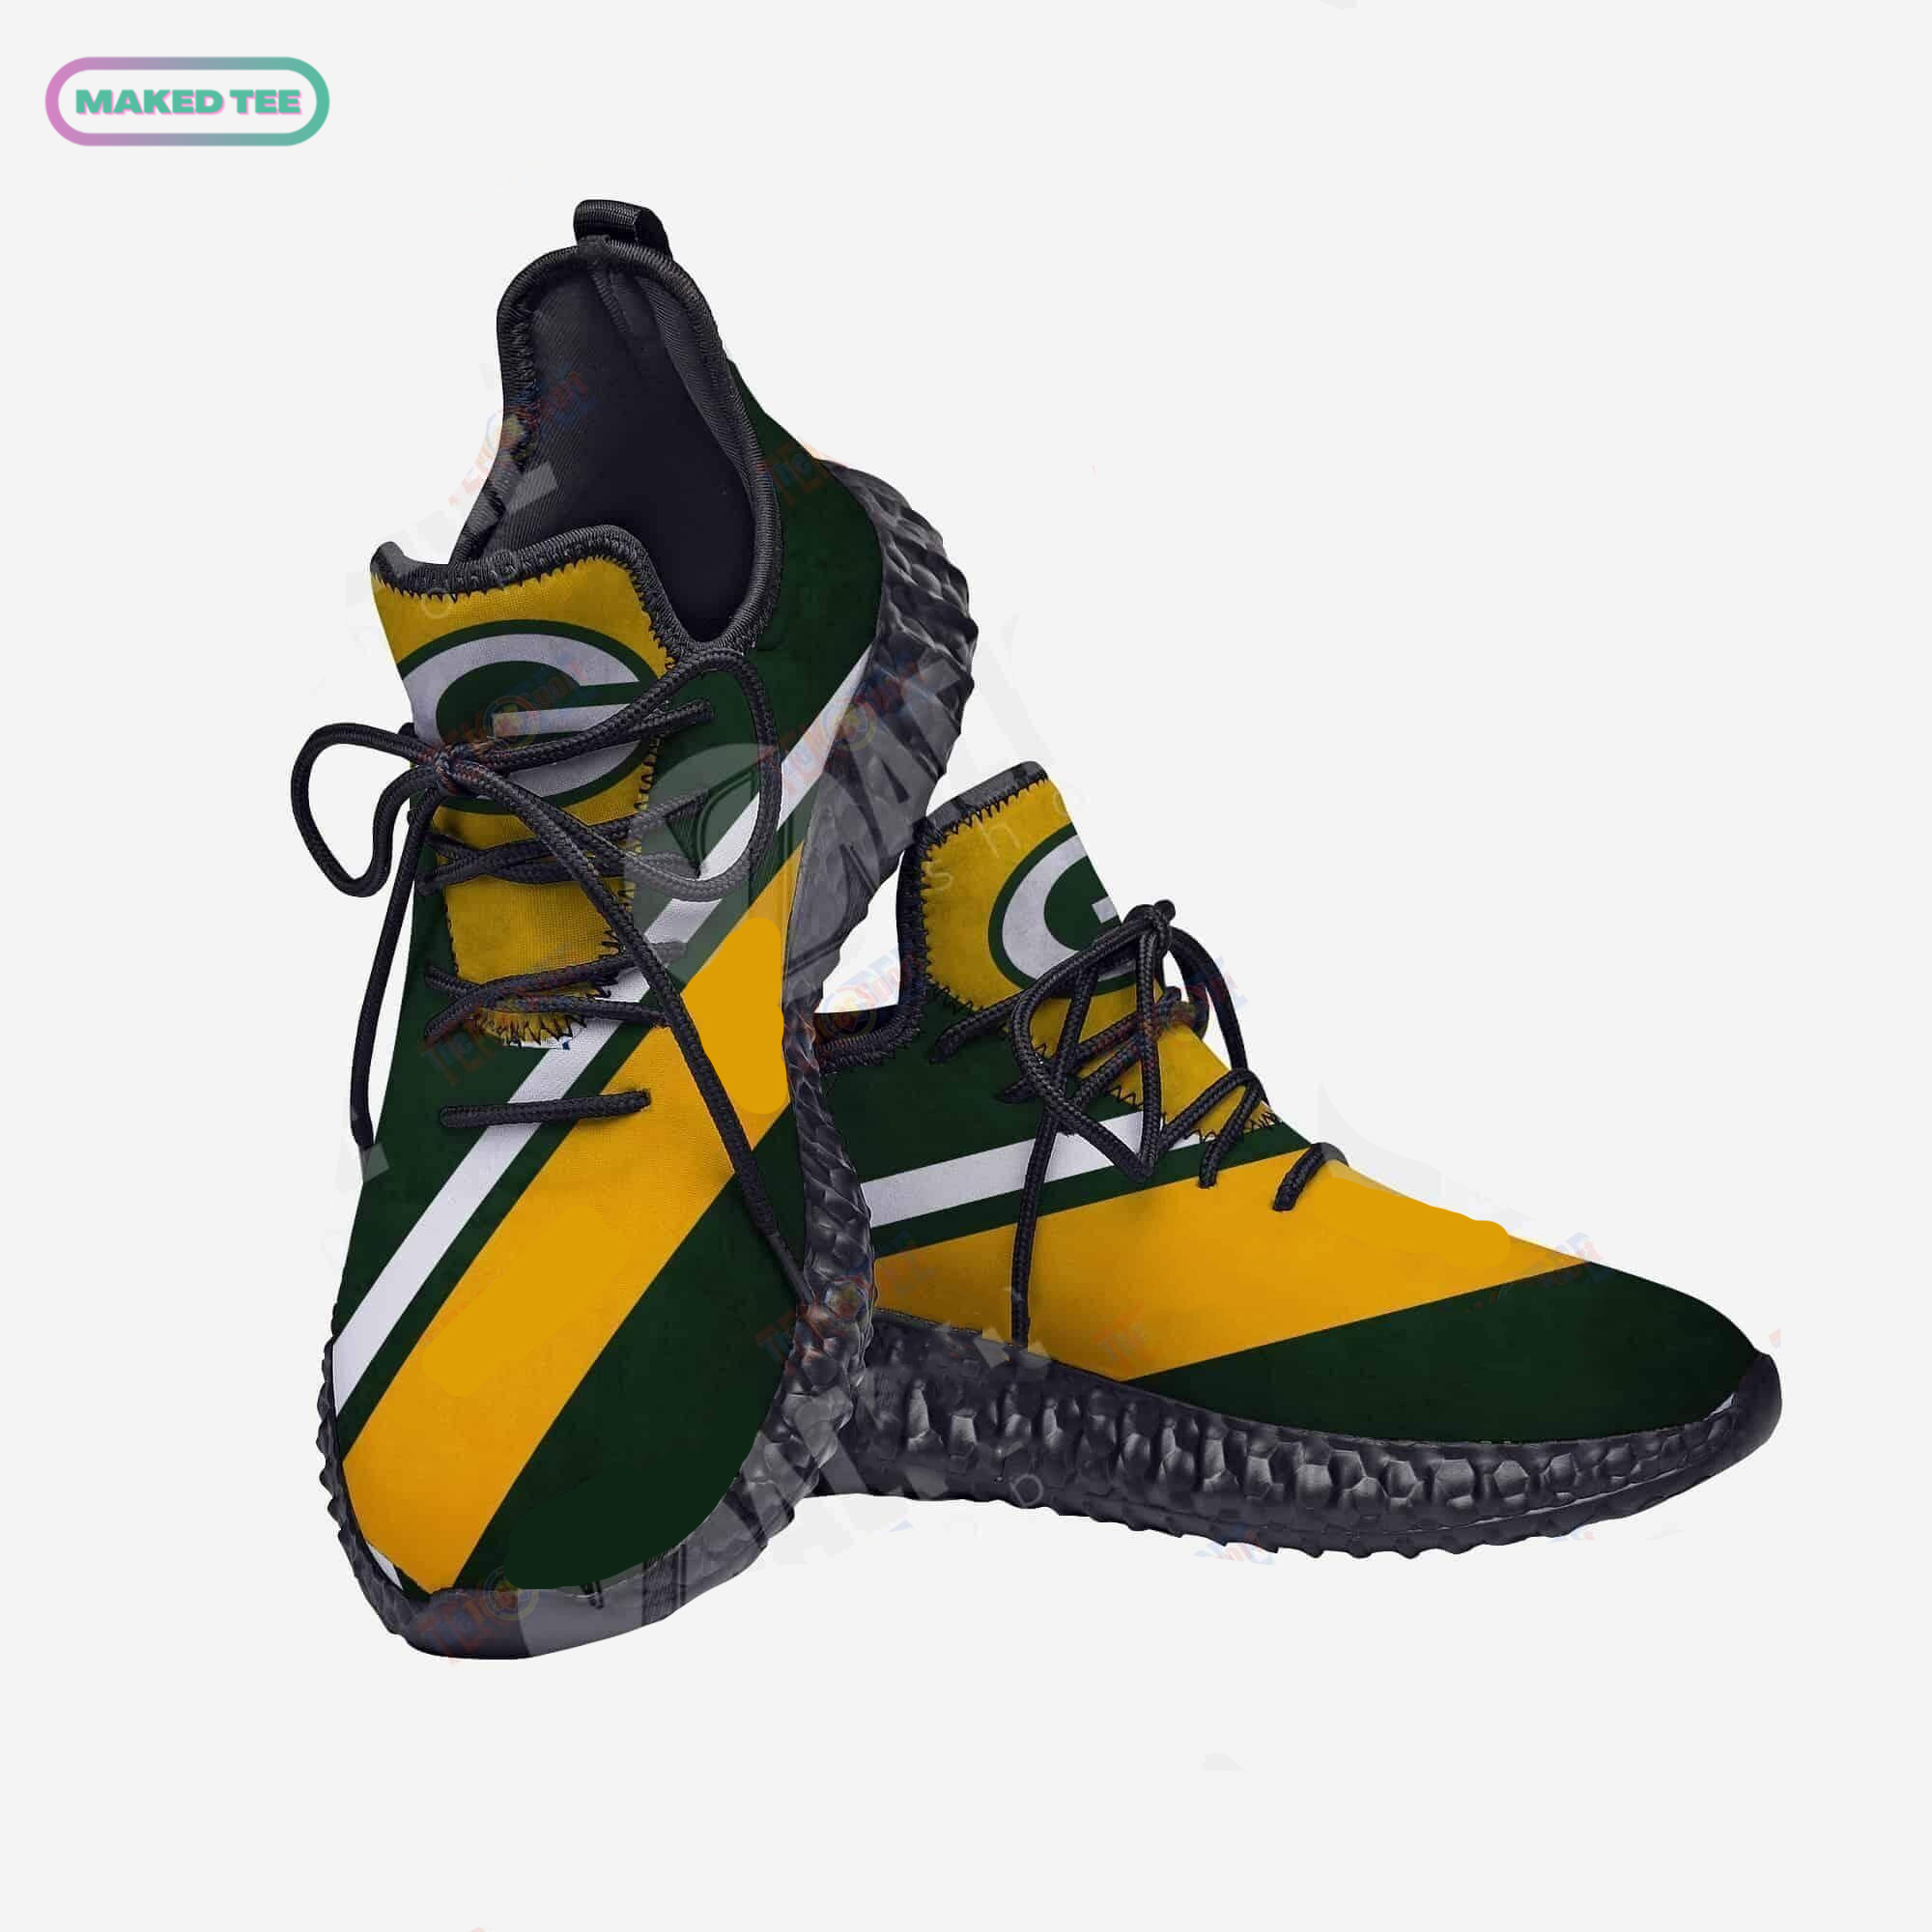 Nfl Green Bay Packers Yeezy Sneaker Shoes For Men And Women Tdt351 Ds0 07501 yzb